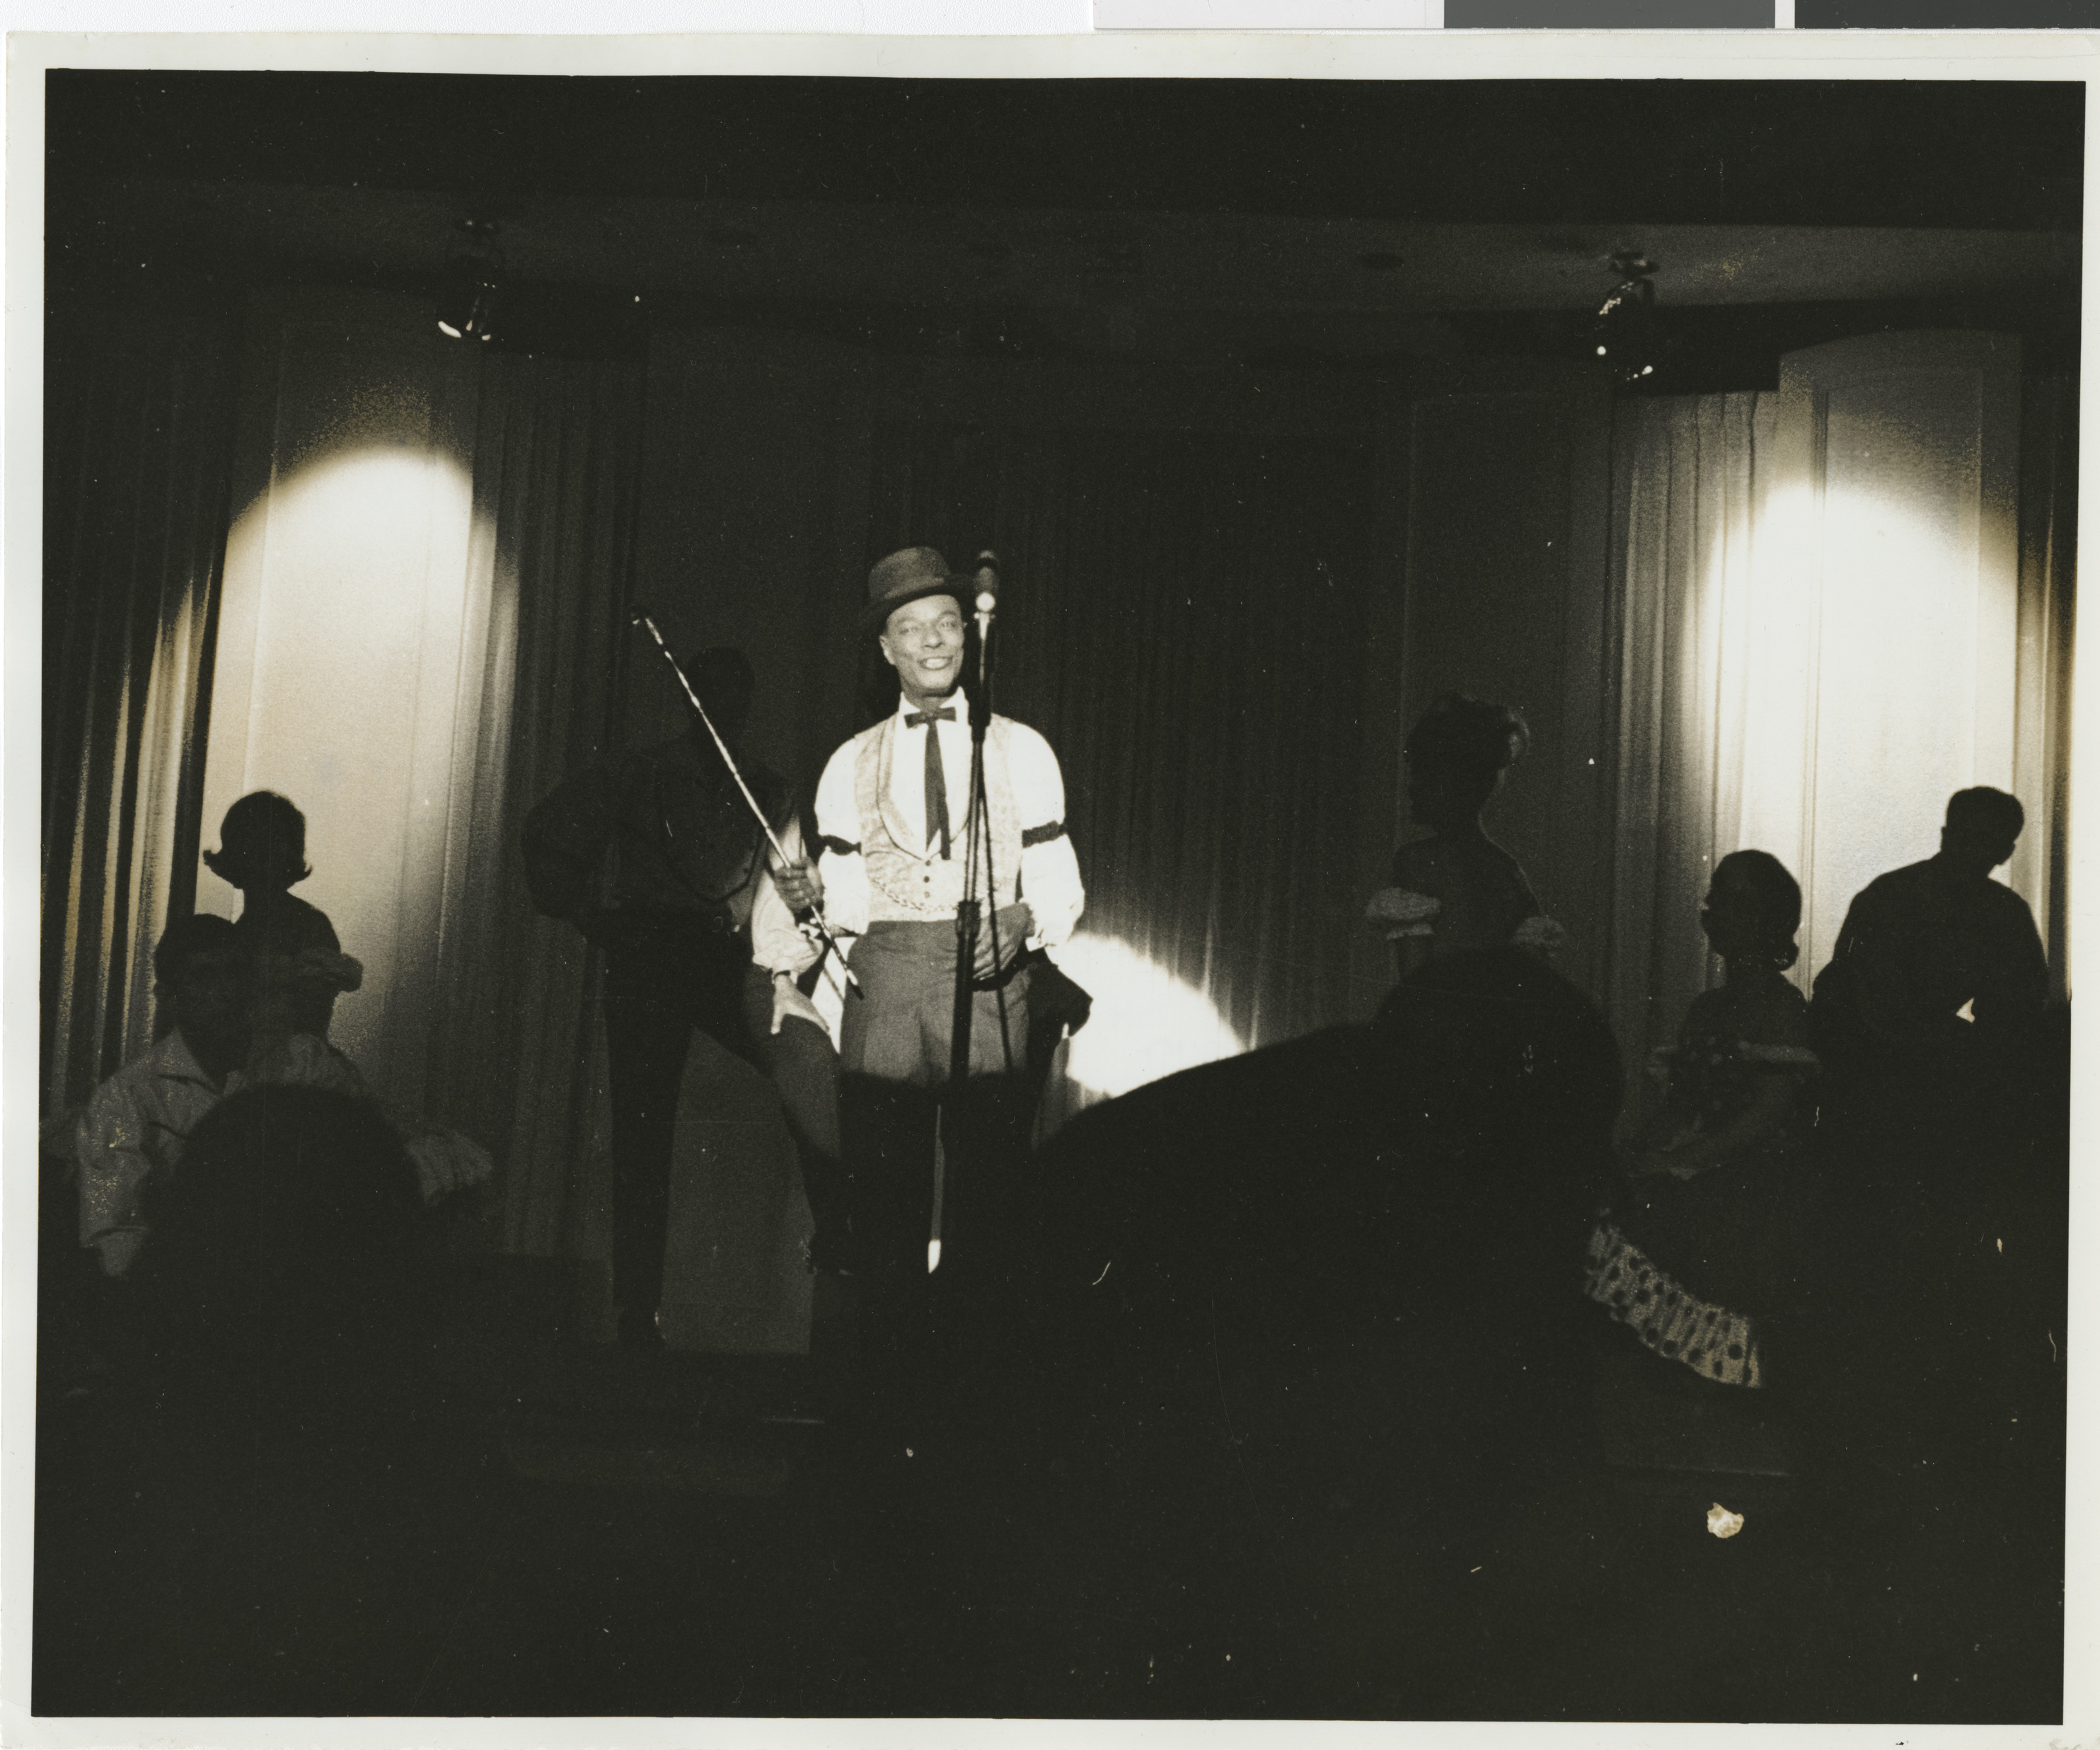 Cole on stage, Image 14